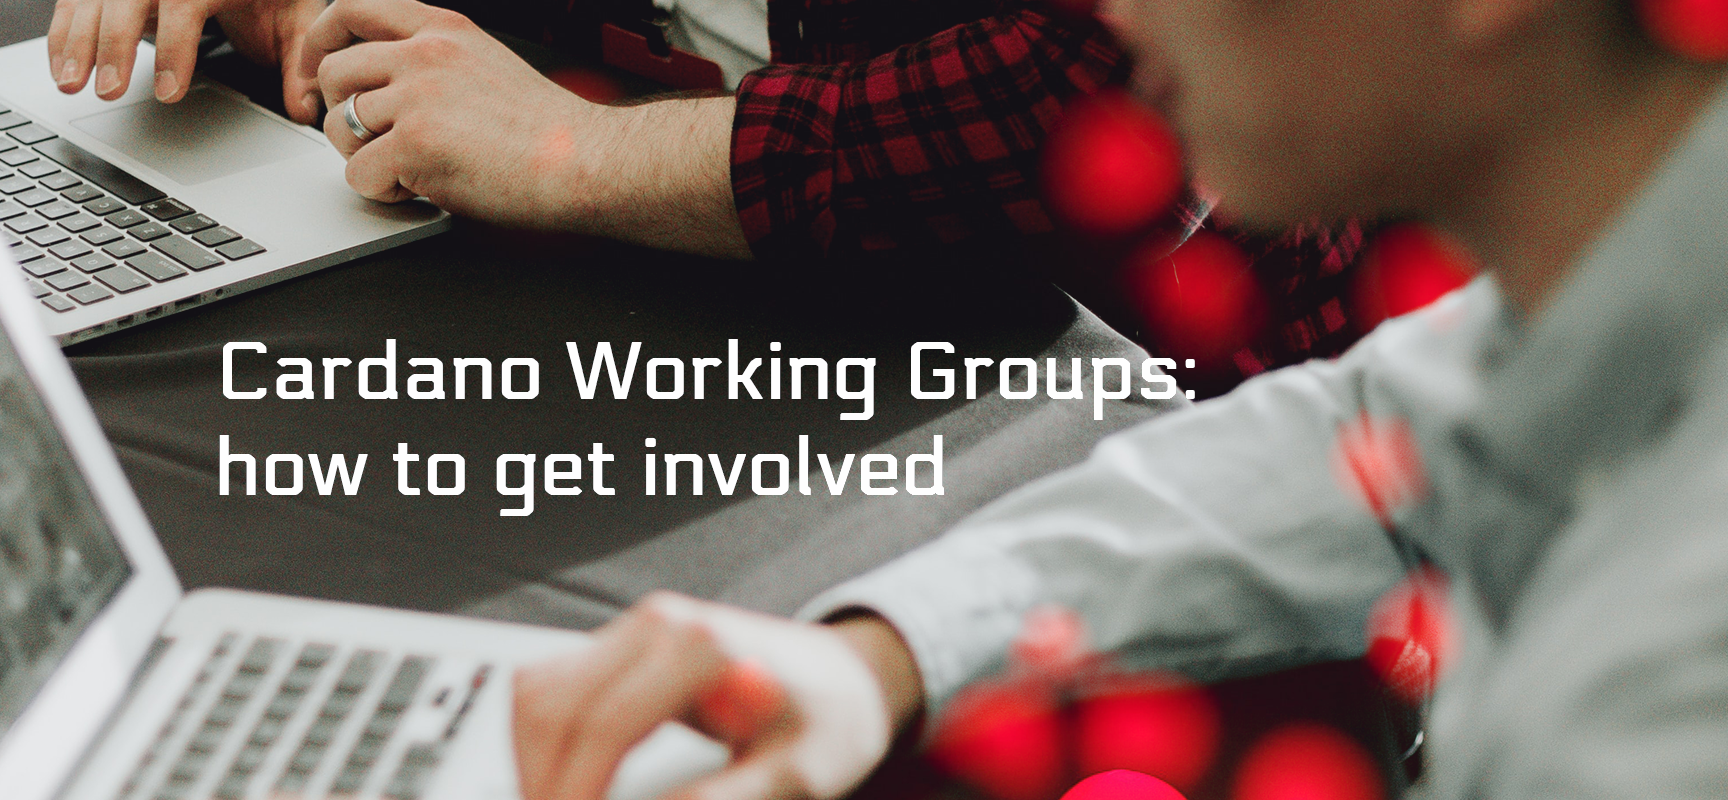 Cardano Working Groups: how to get involved